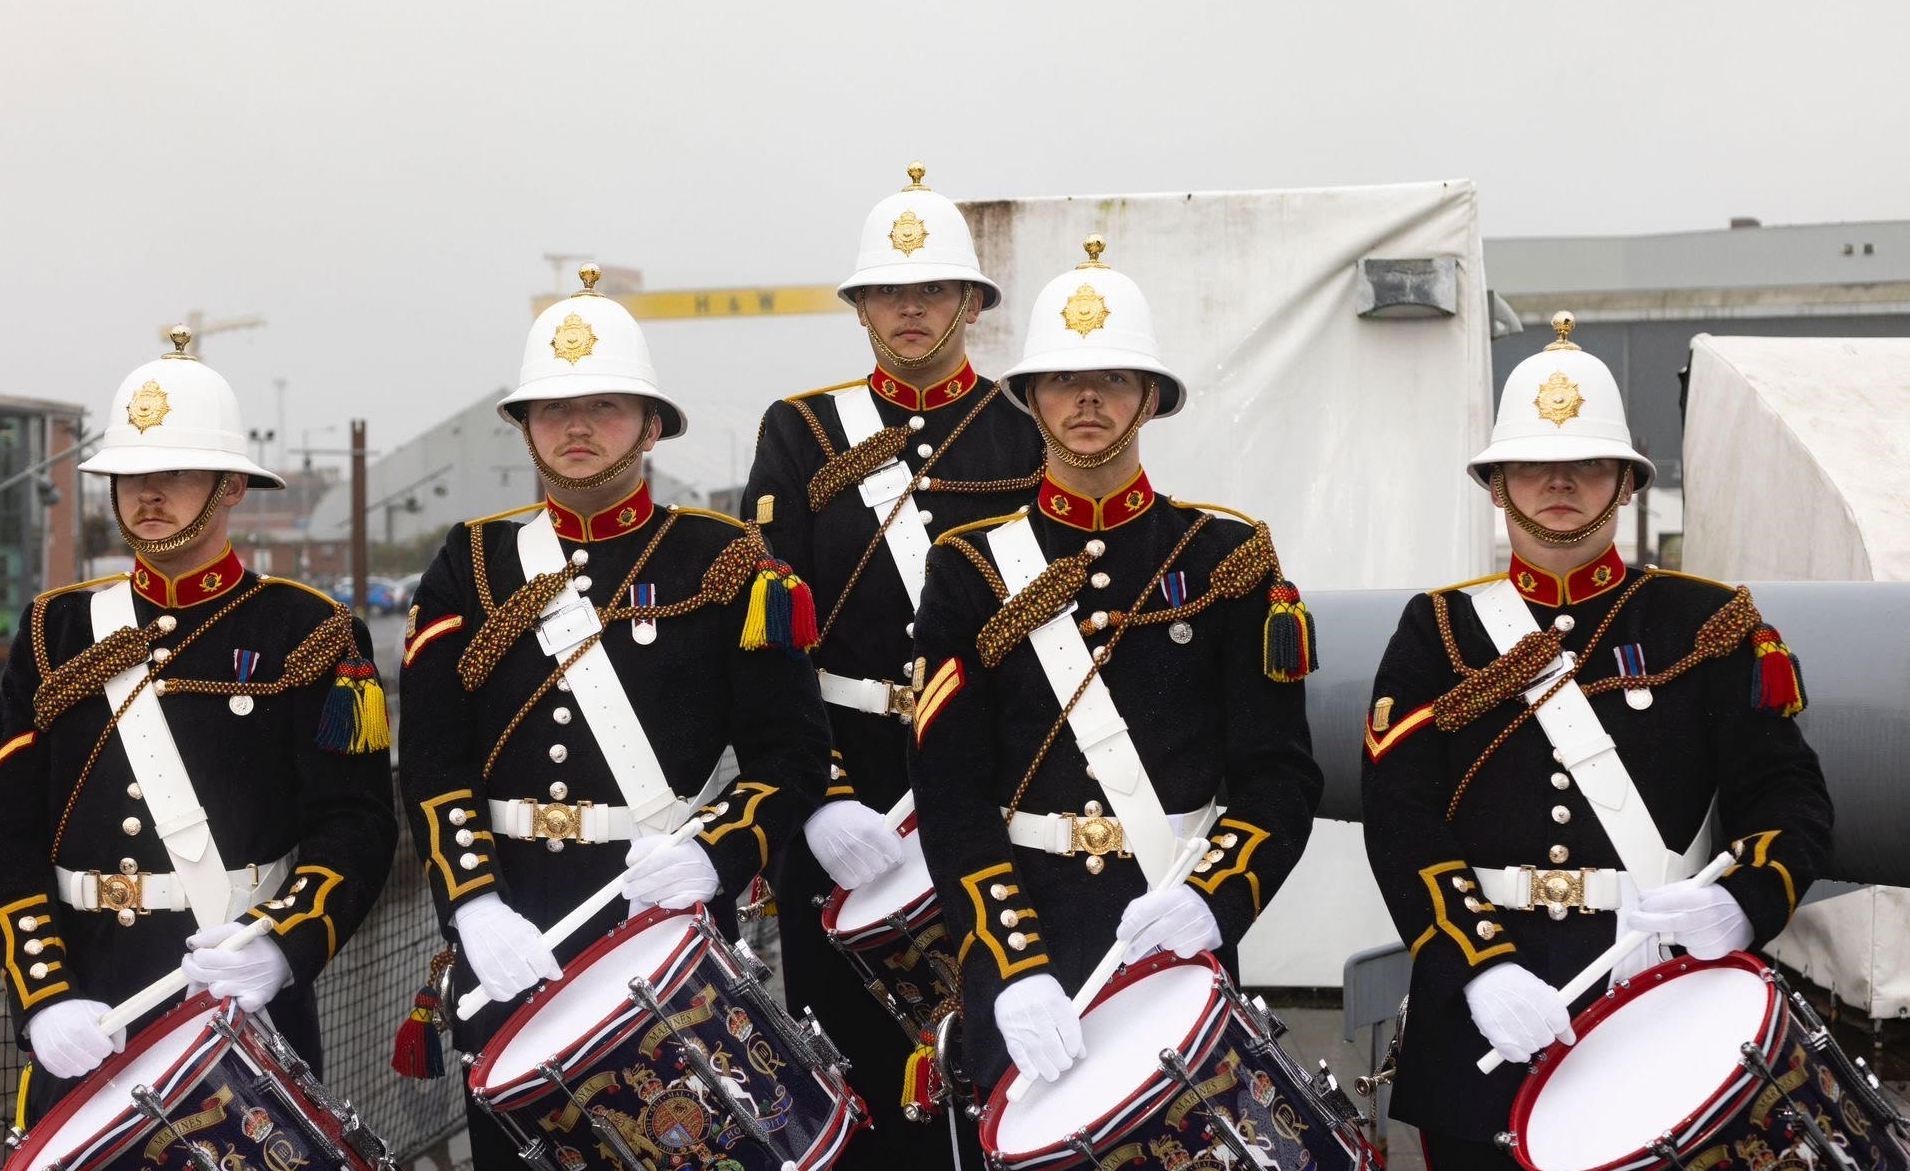 FULL ON: The full line-up of HM The Royal Marines Band Scotland is booked to play at the Macdonald Highland Resort